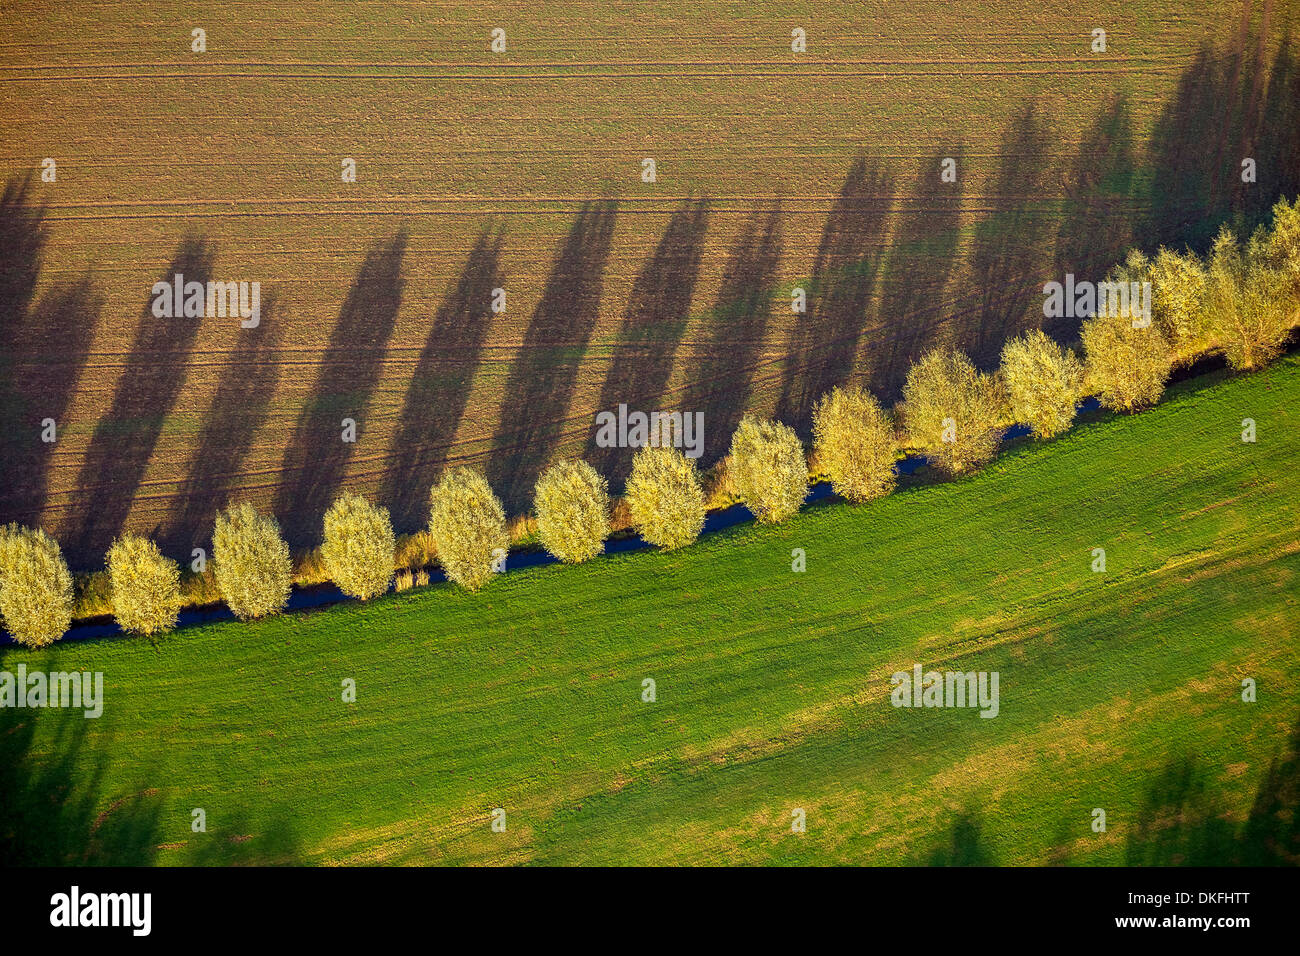 Row of trees with shadows, autumn, aerial view, Duisburg, Ruhr area, North Rhine-Westphalia, Germany Stock Photo